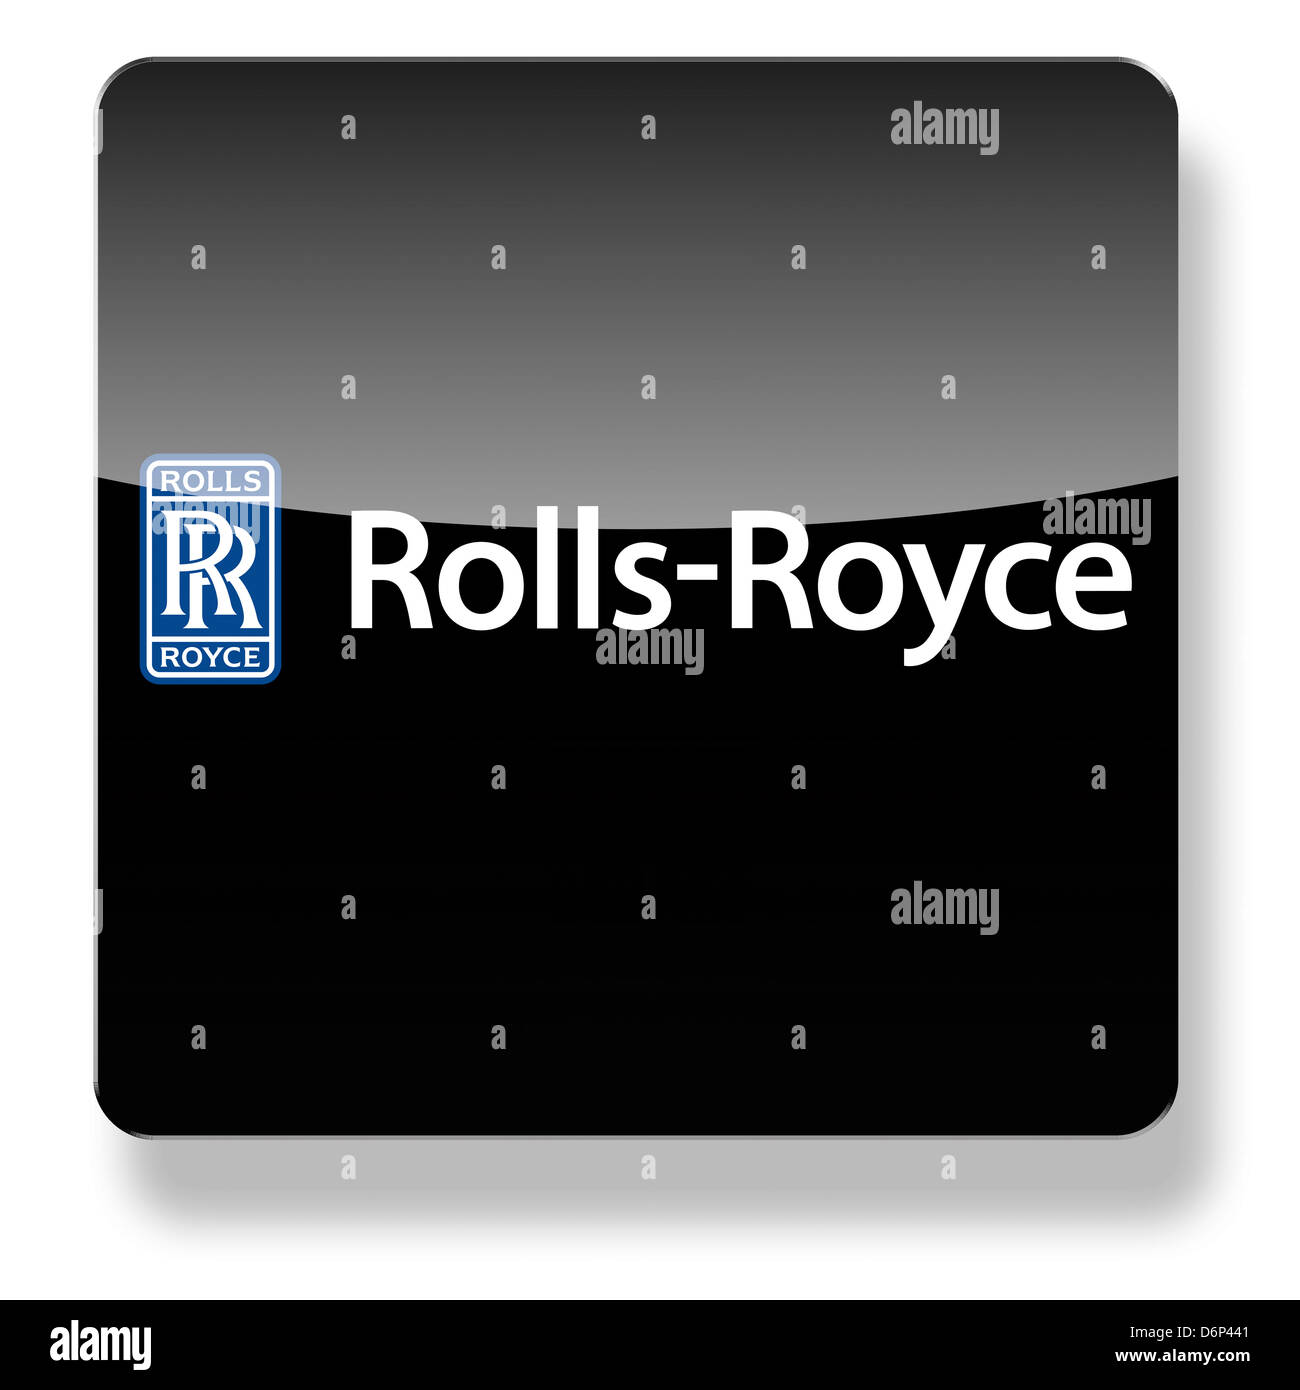 Rolls Royce logo as an app icon. Clipping path included. Stock Photo